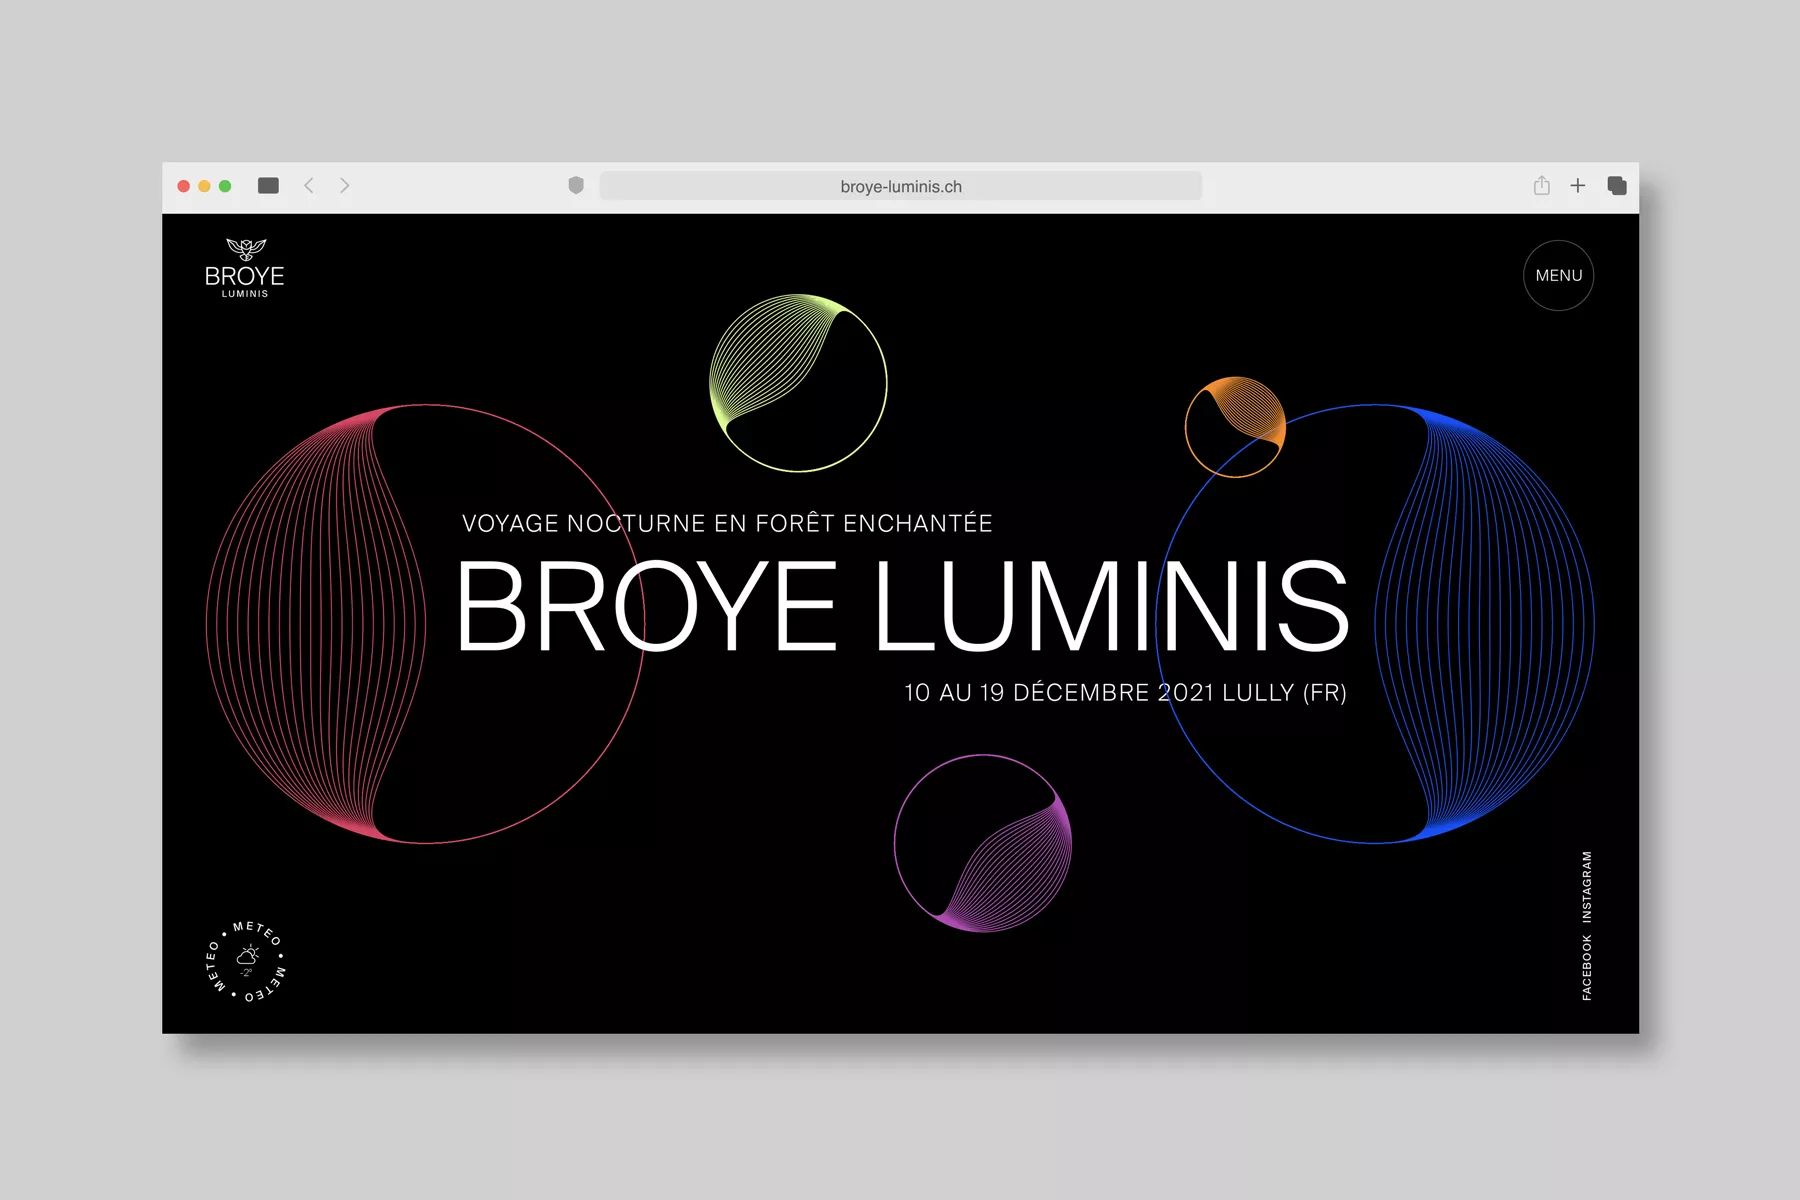 Broye Luminis, page d’accueil du site web.